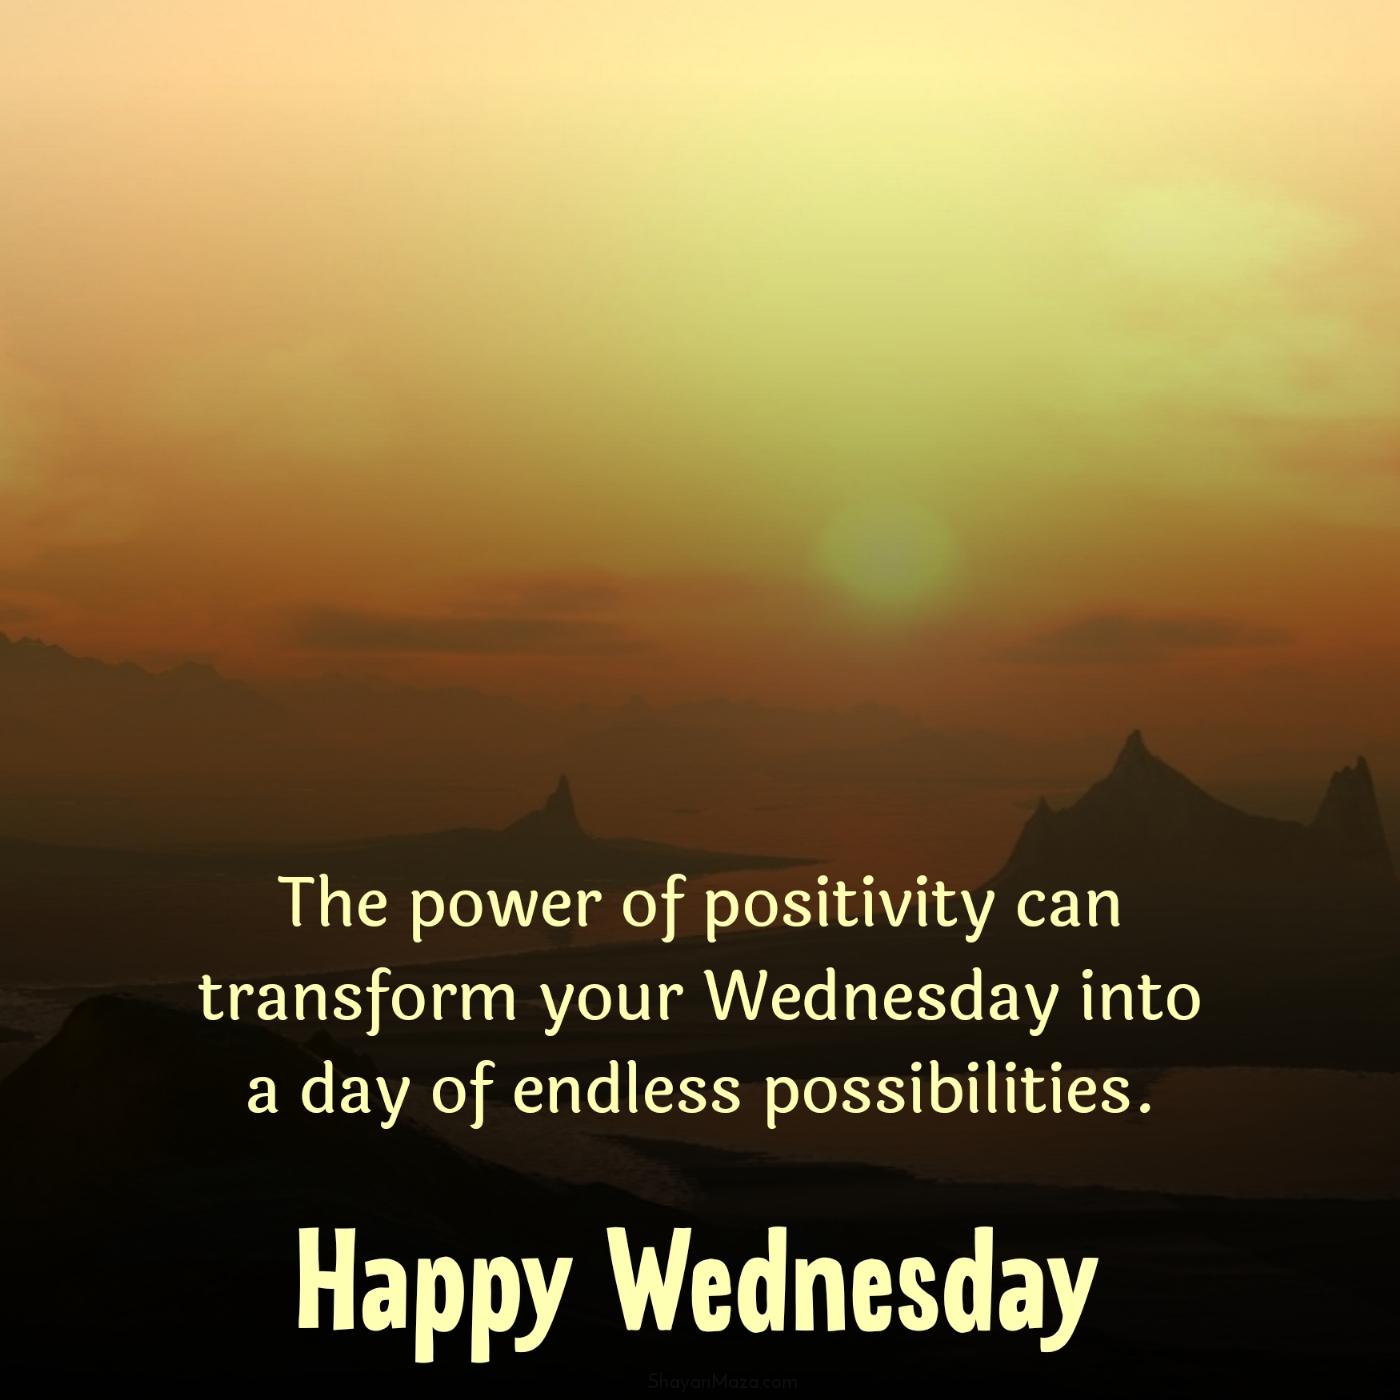 The power of positivity can transform your Wednesday